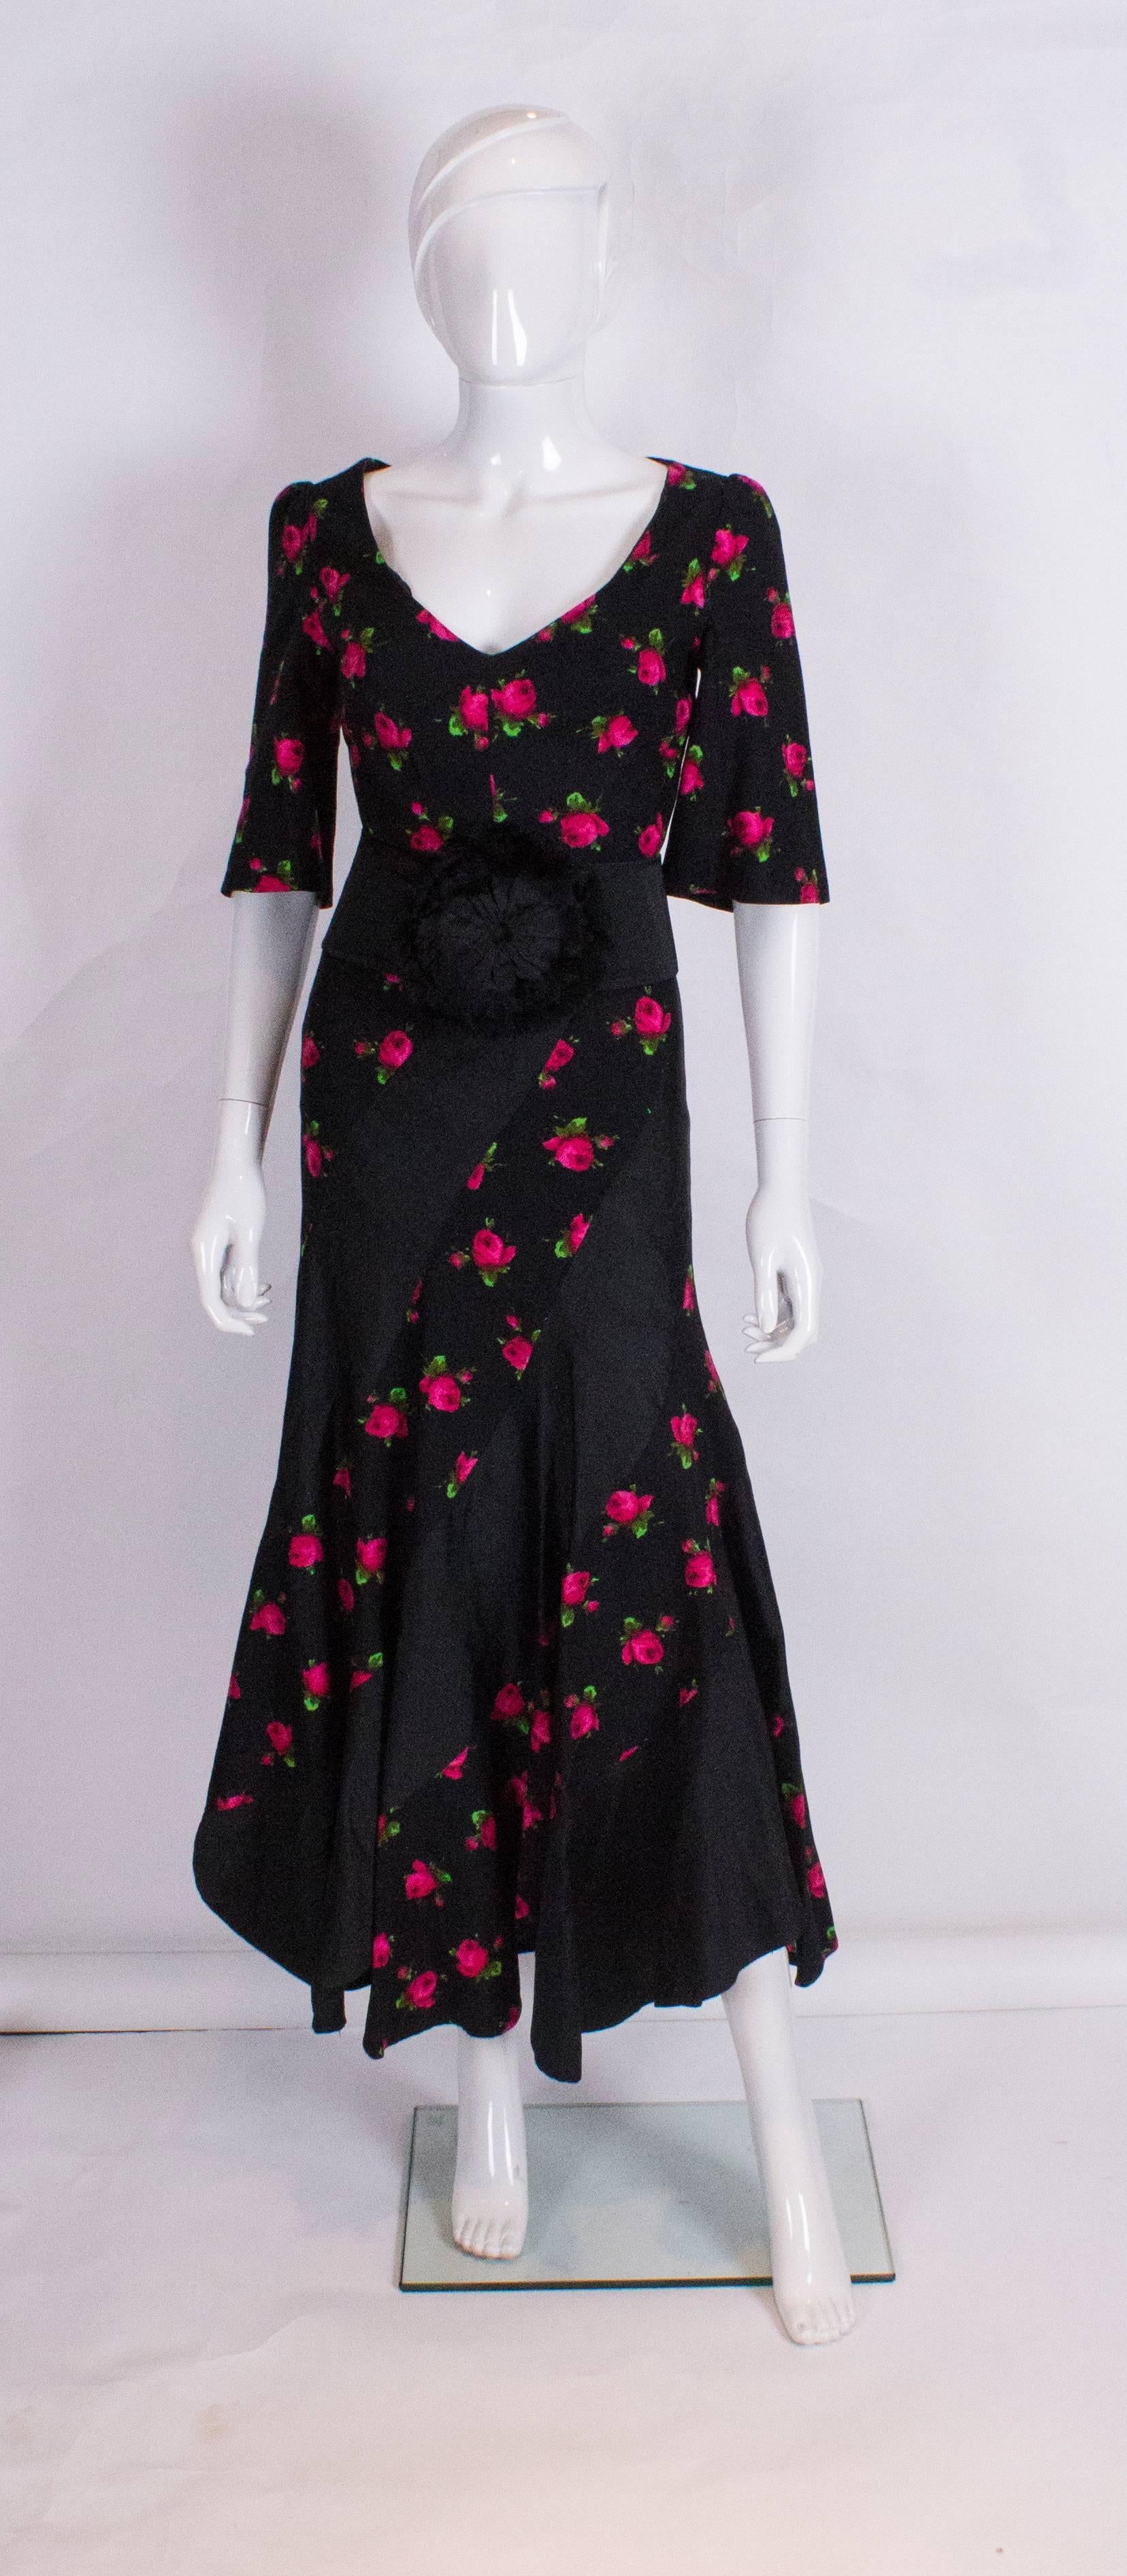 A super evening gown with spiral detail. This v neck dress in panels of black and black and pink panels in a spiral design.The dress is fully lined with an internal and external zip, and has elbow length sleeves and a scalloped hemline.